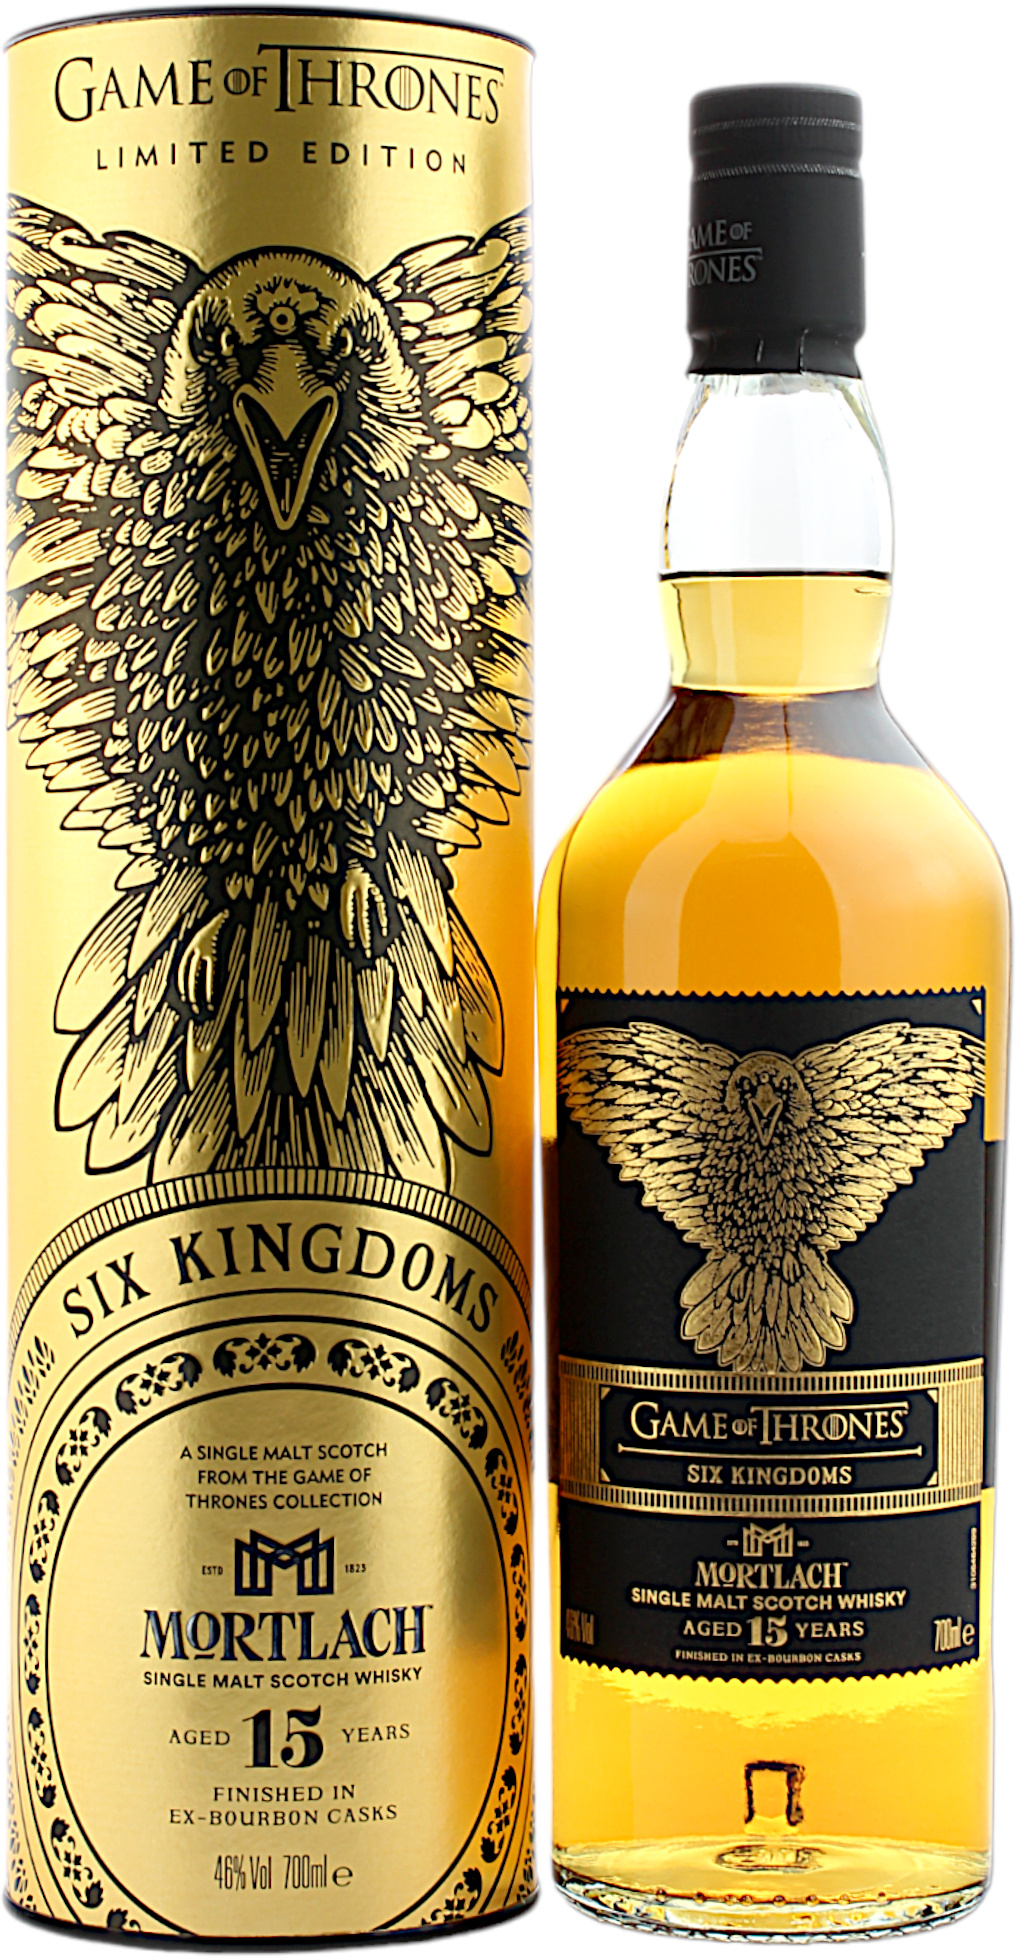 Mortlach 15 Jahre Six Kingdoms - Game of Thrones 46.0% 0,7l